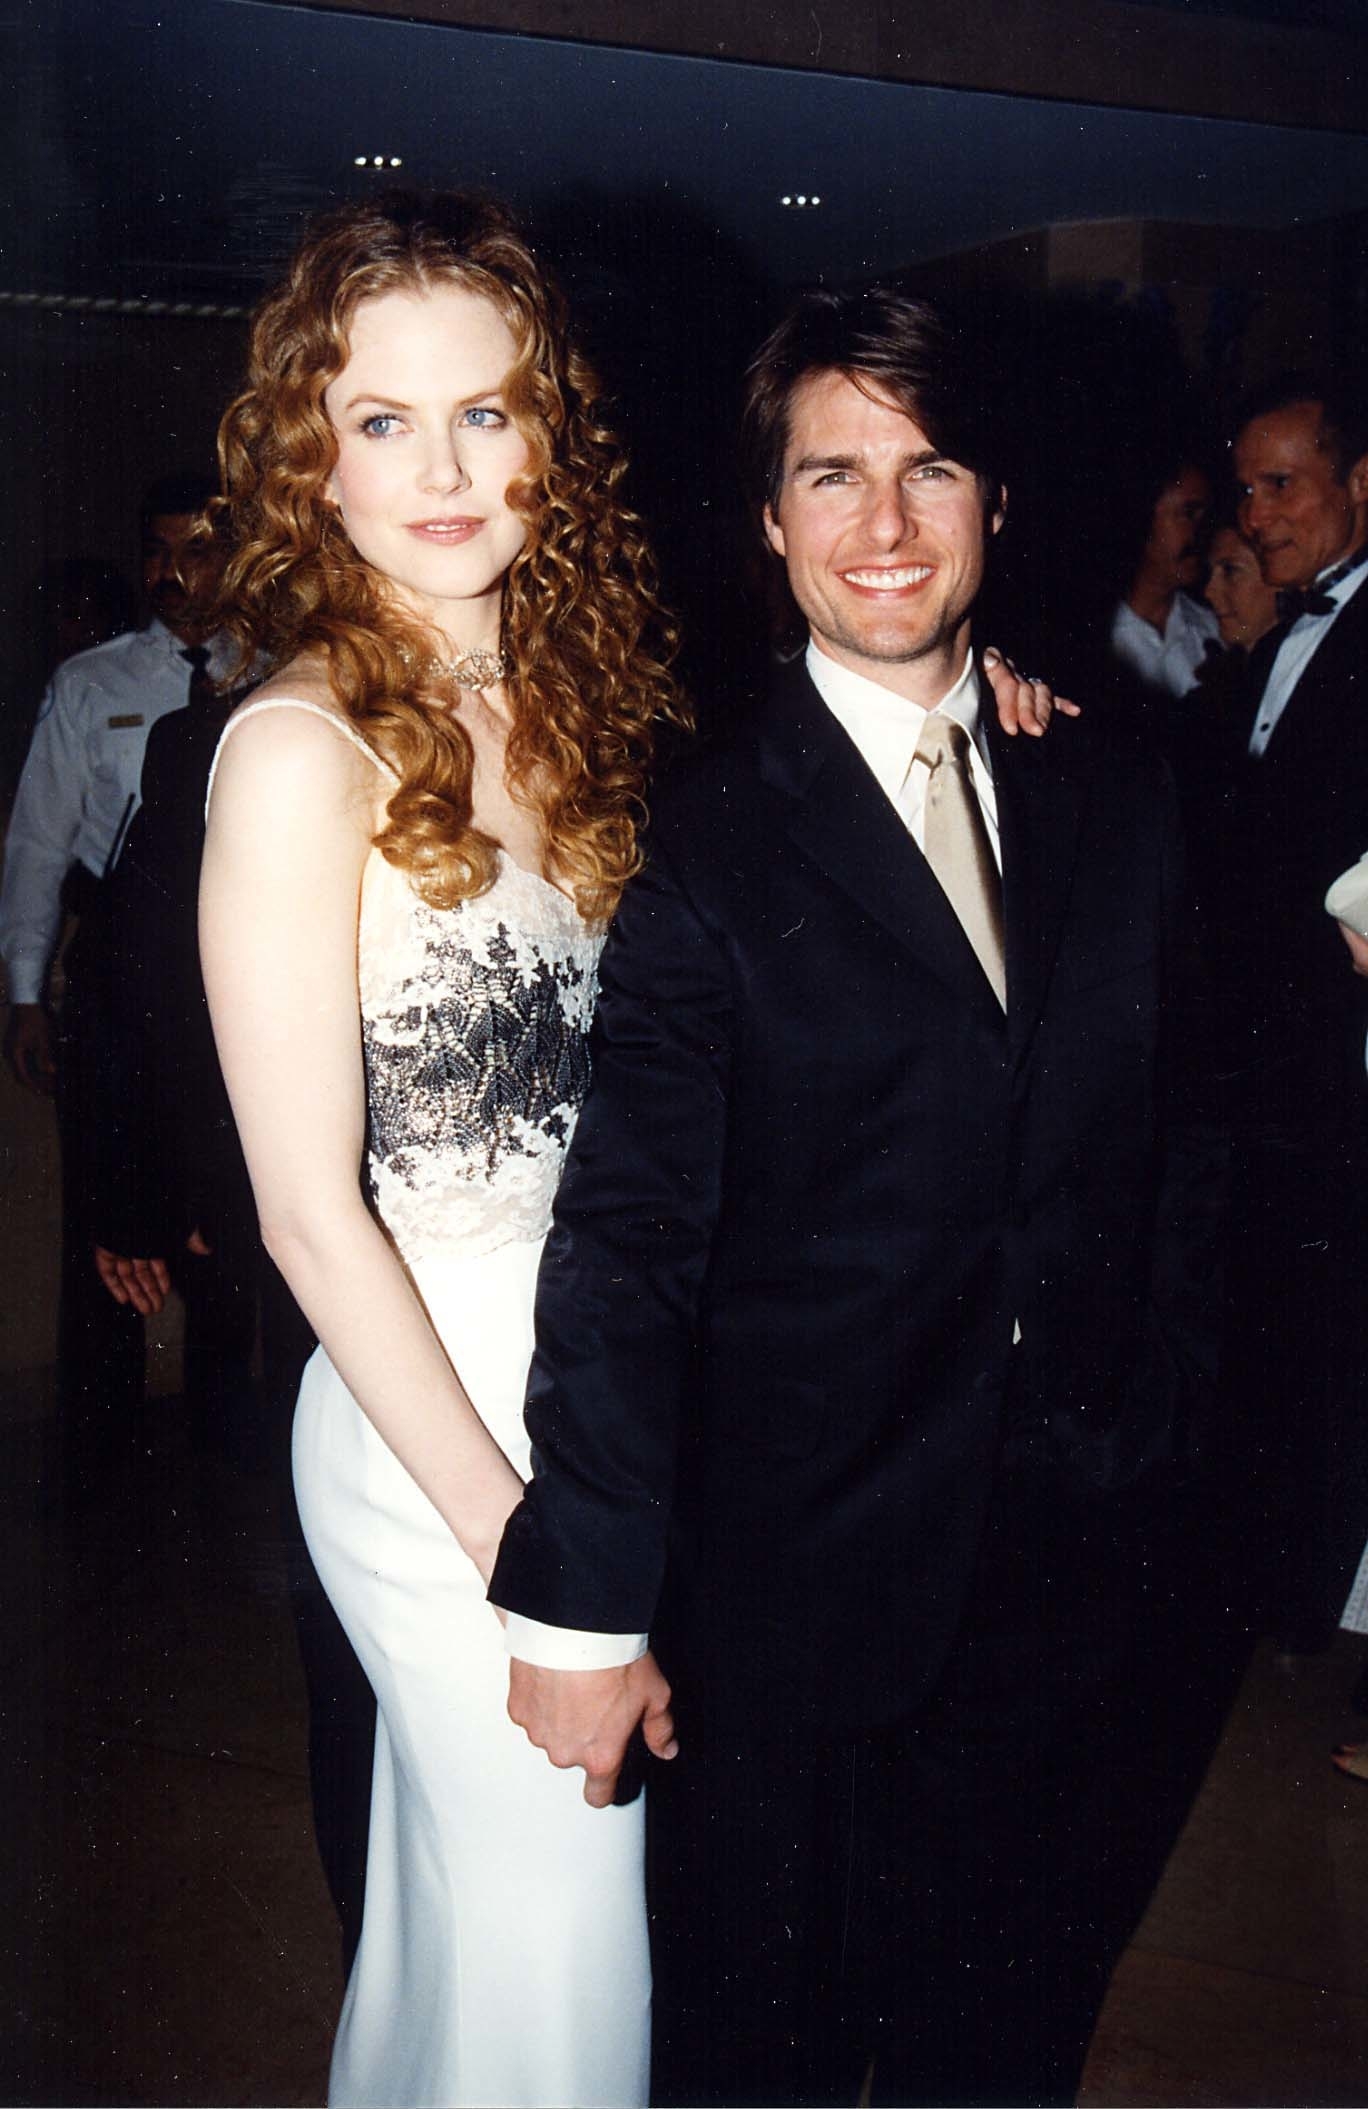 Tom in a suit and tie, smiling and holding hands with Nicole Kidman